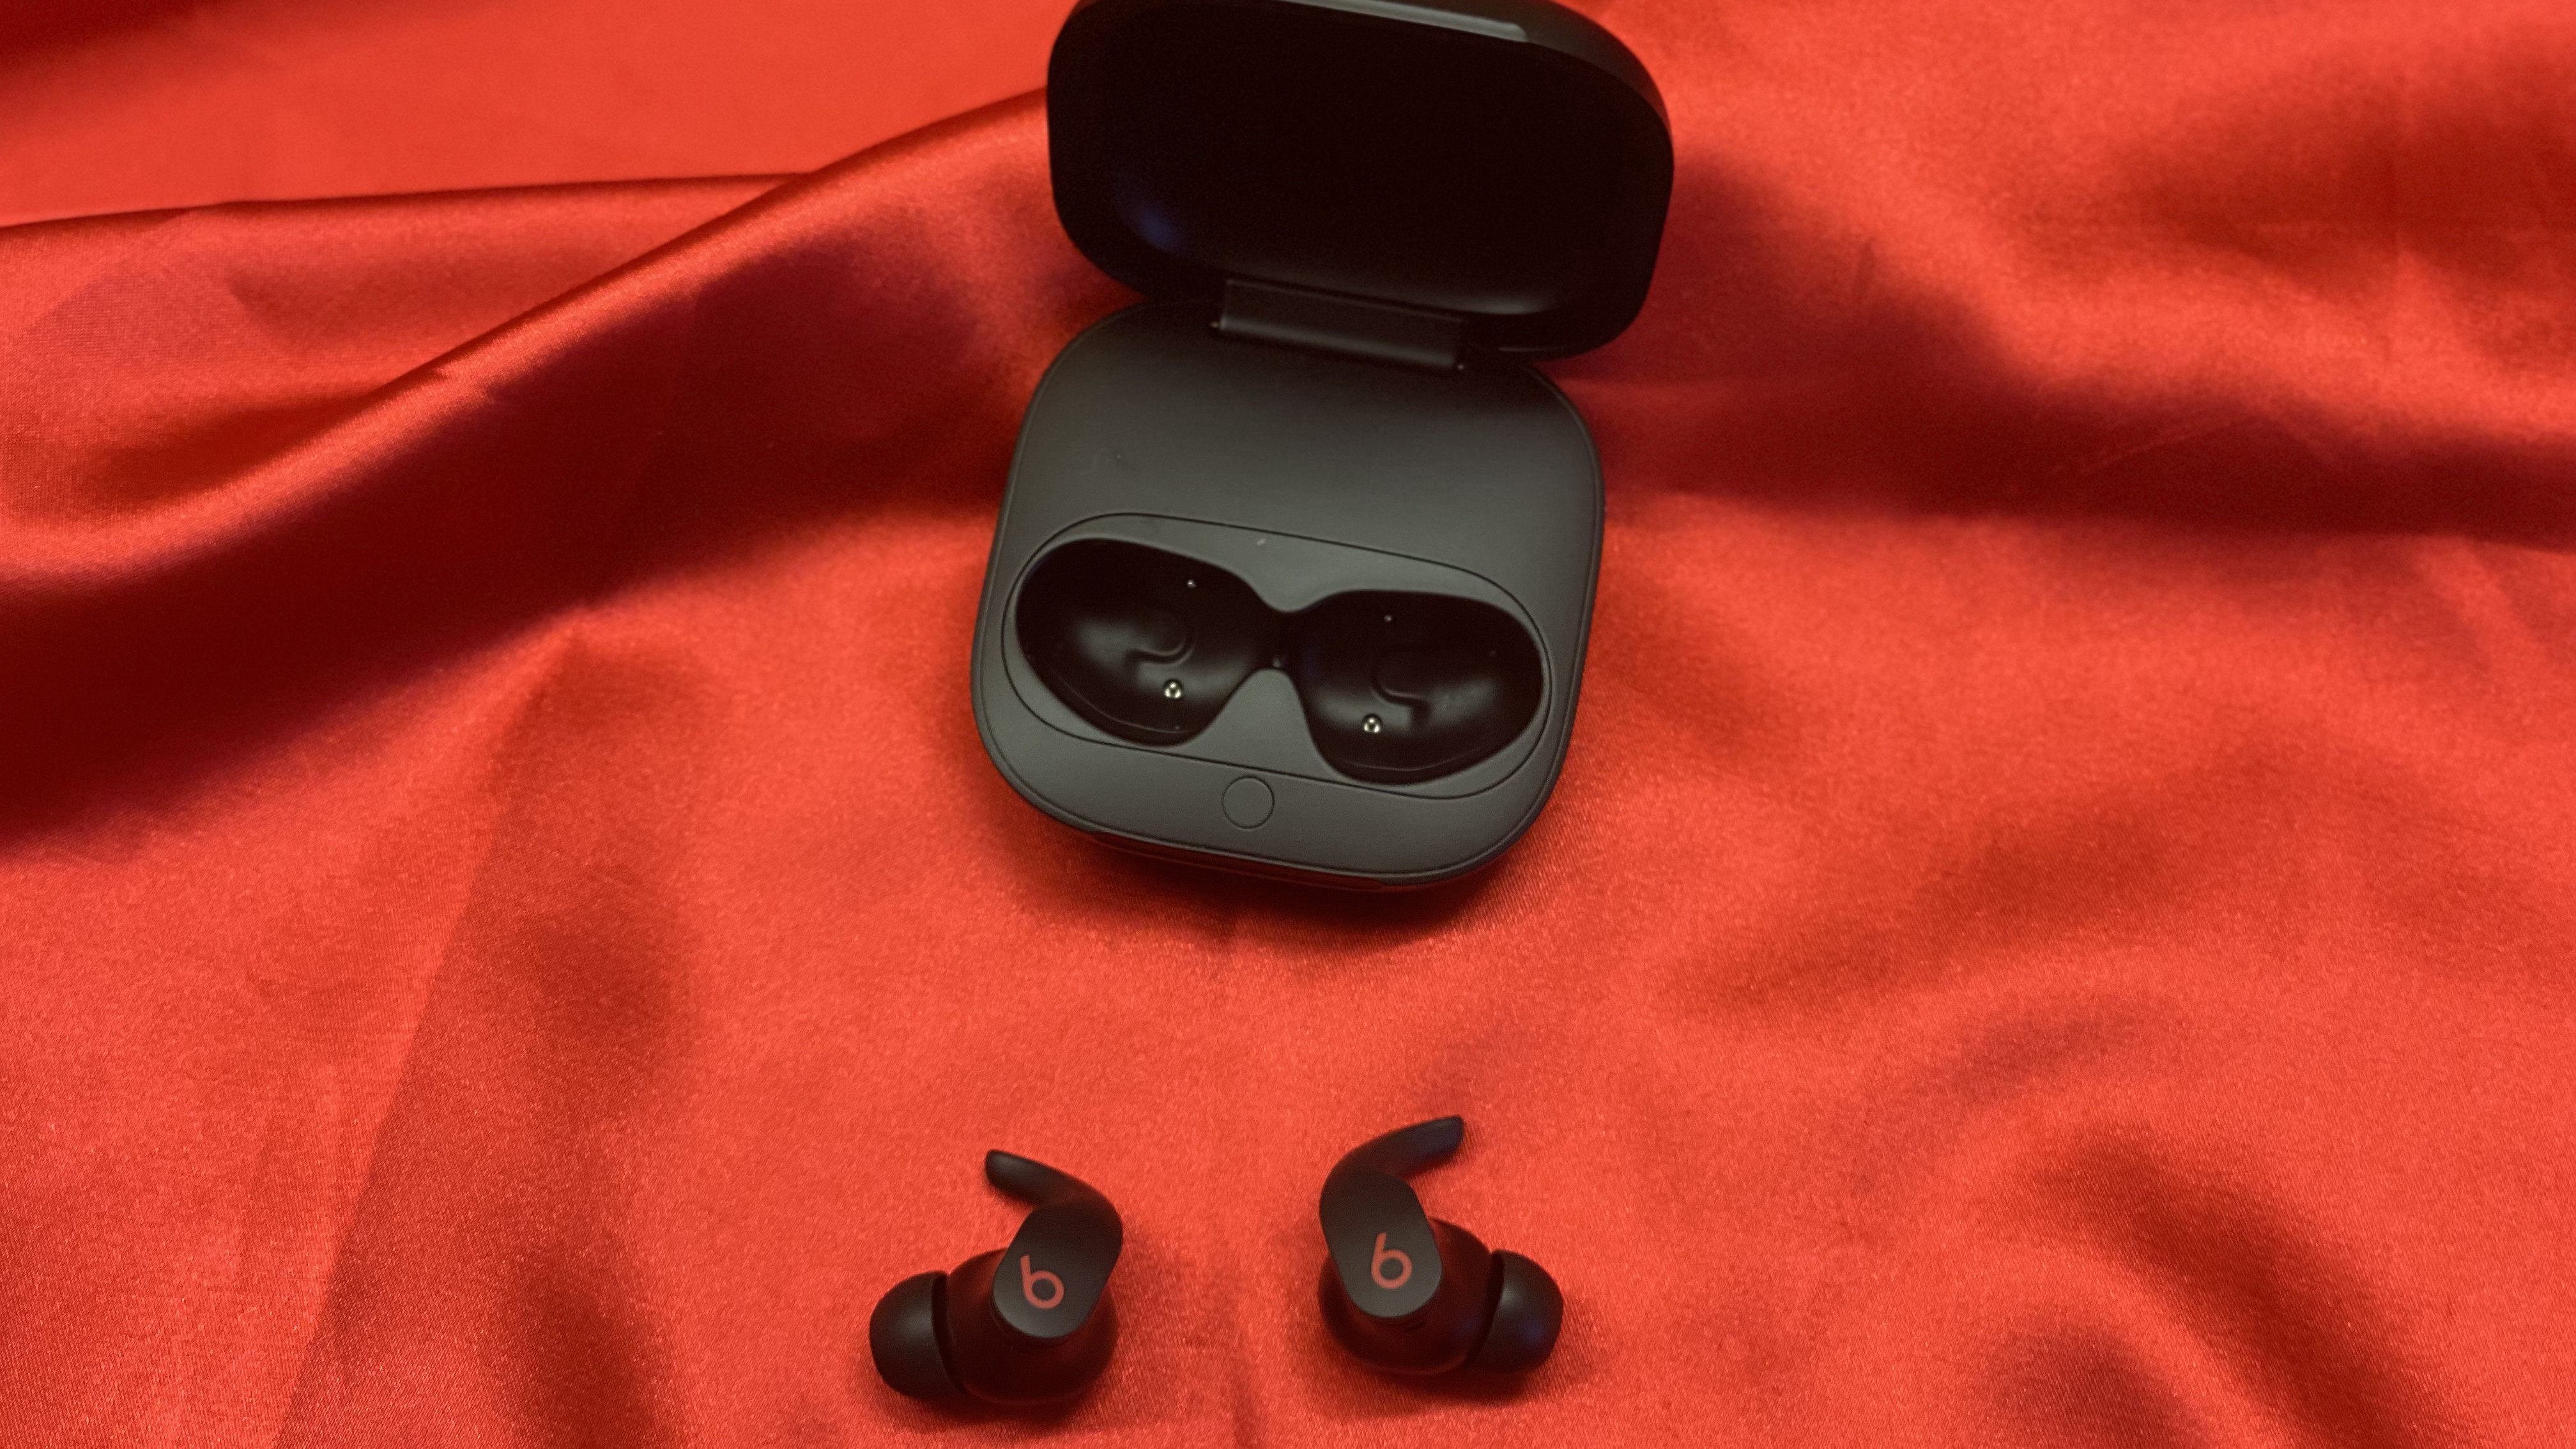 The Beats Fit Pro earbuds next to their charging case on a red backdrop